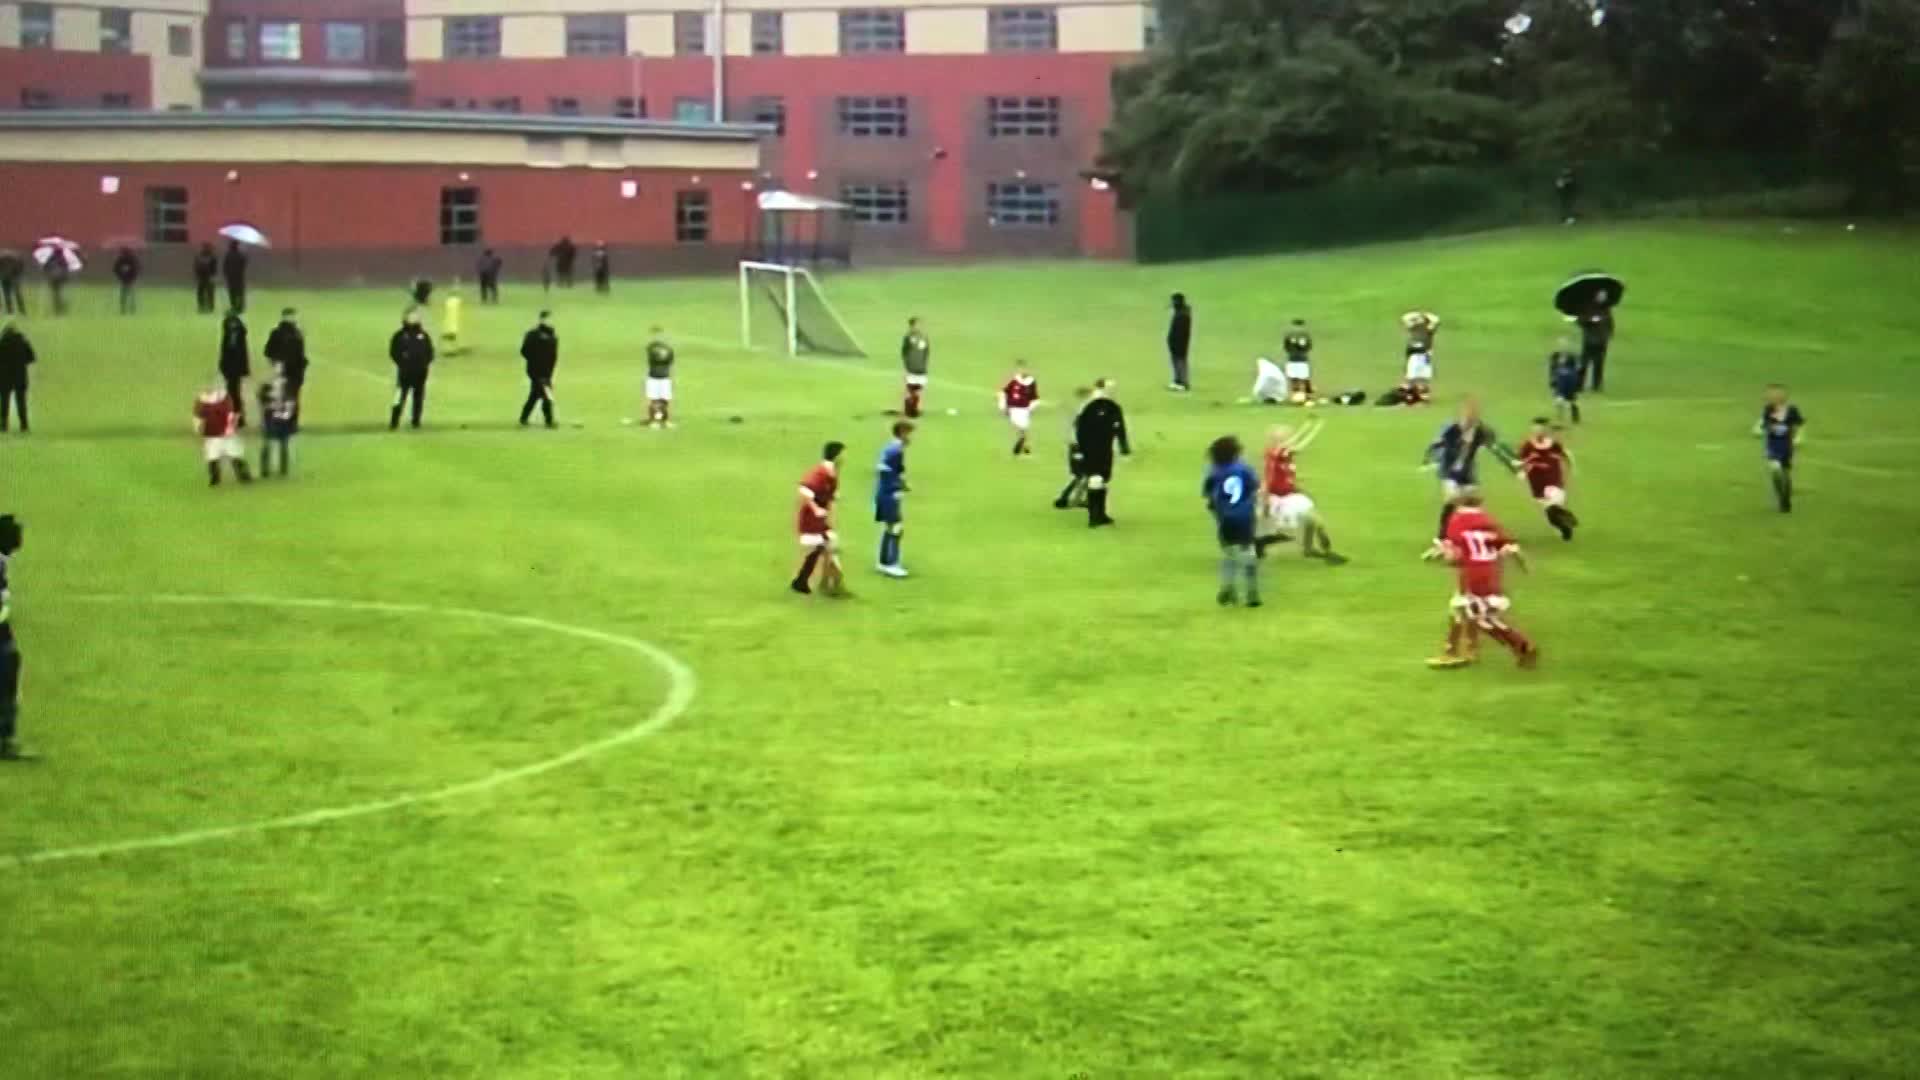 12 Year Old Brandon Wust Scoring against Wals